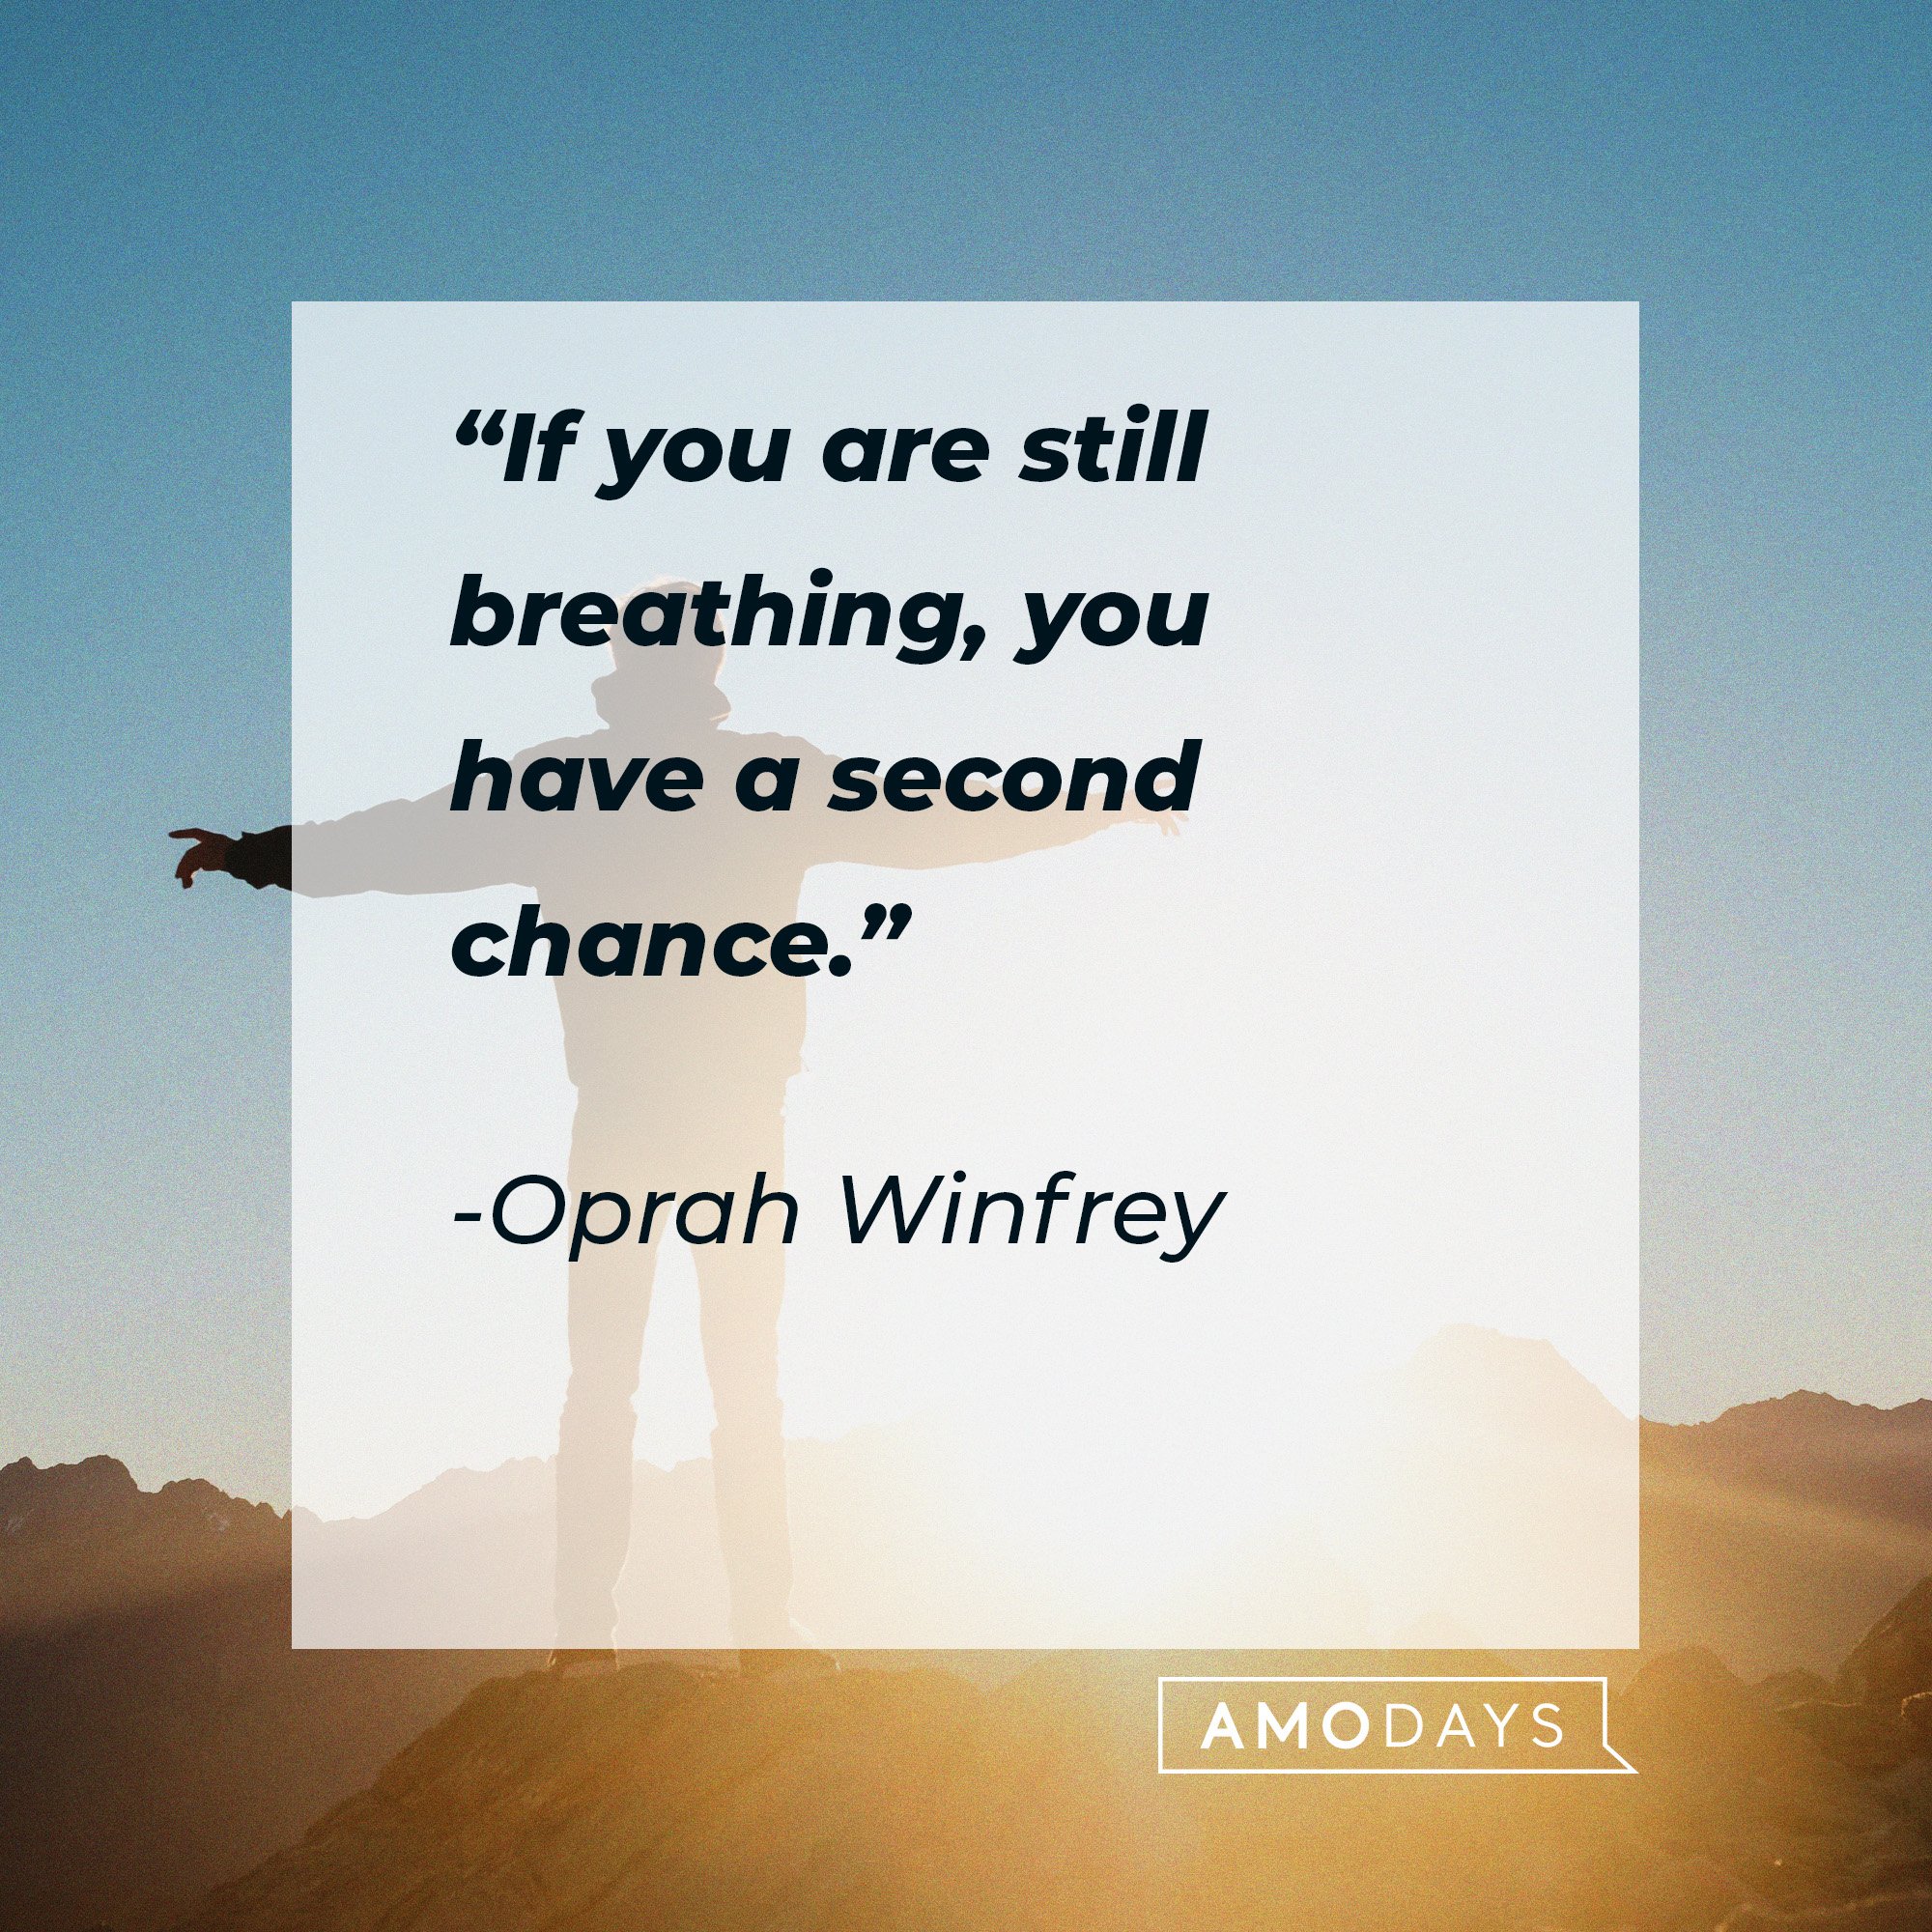 Oprah Winfrey's quote: “If you are still breathing, you have a second chance.” | Image: AmoDays